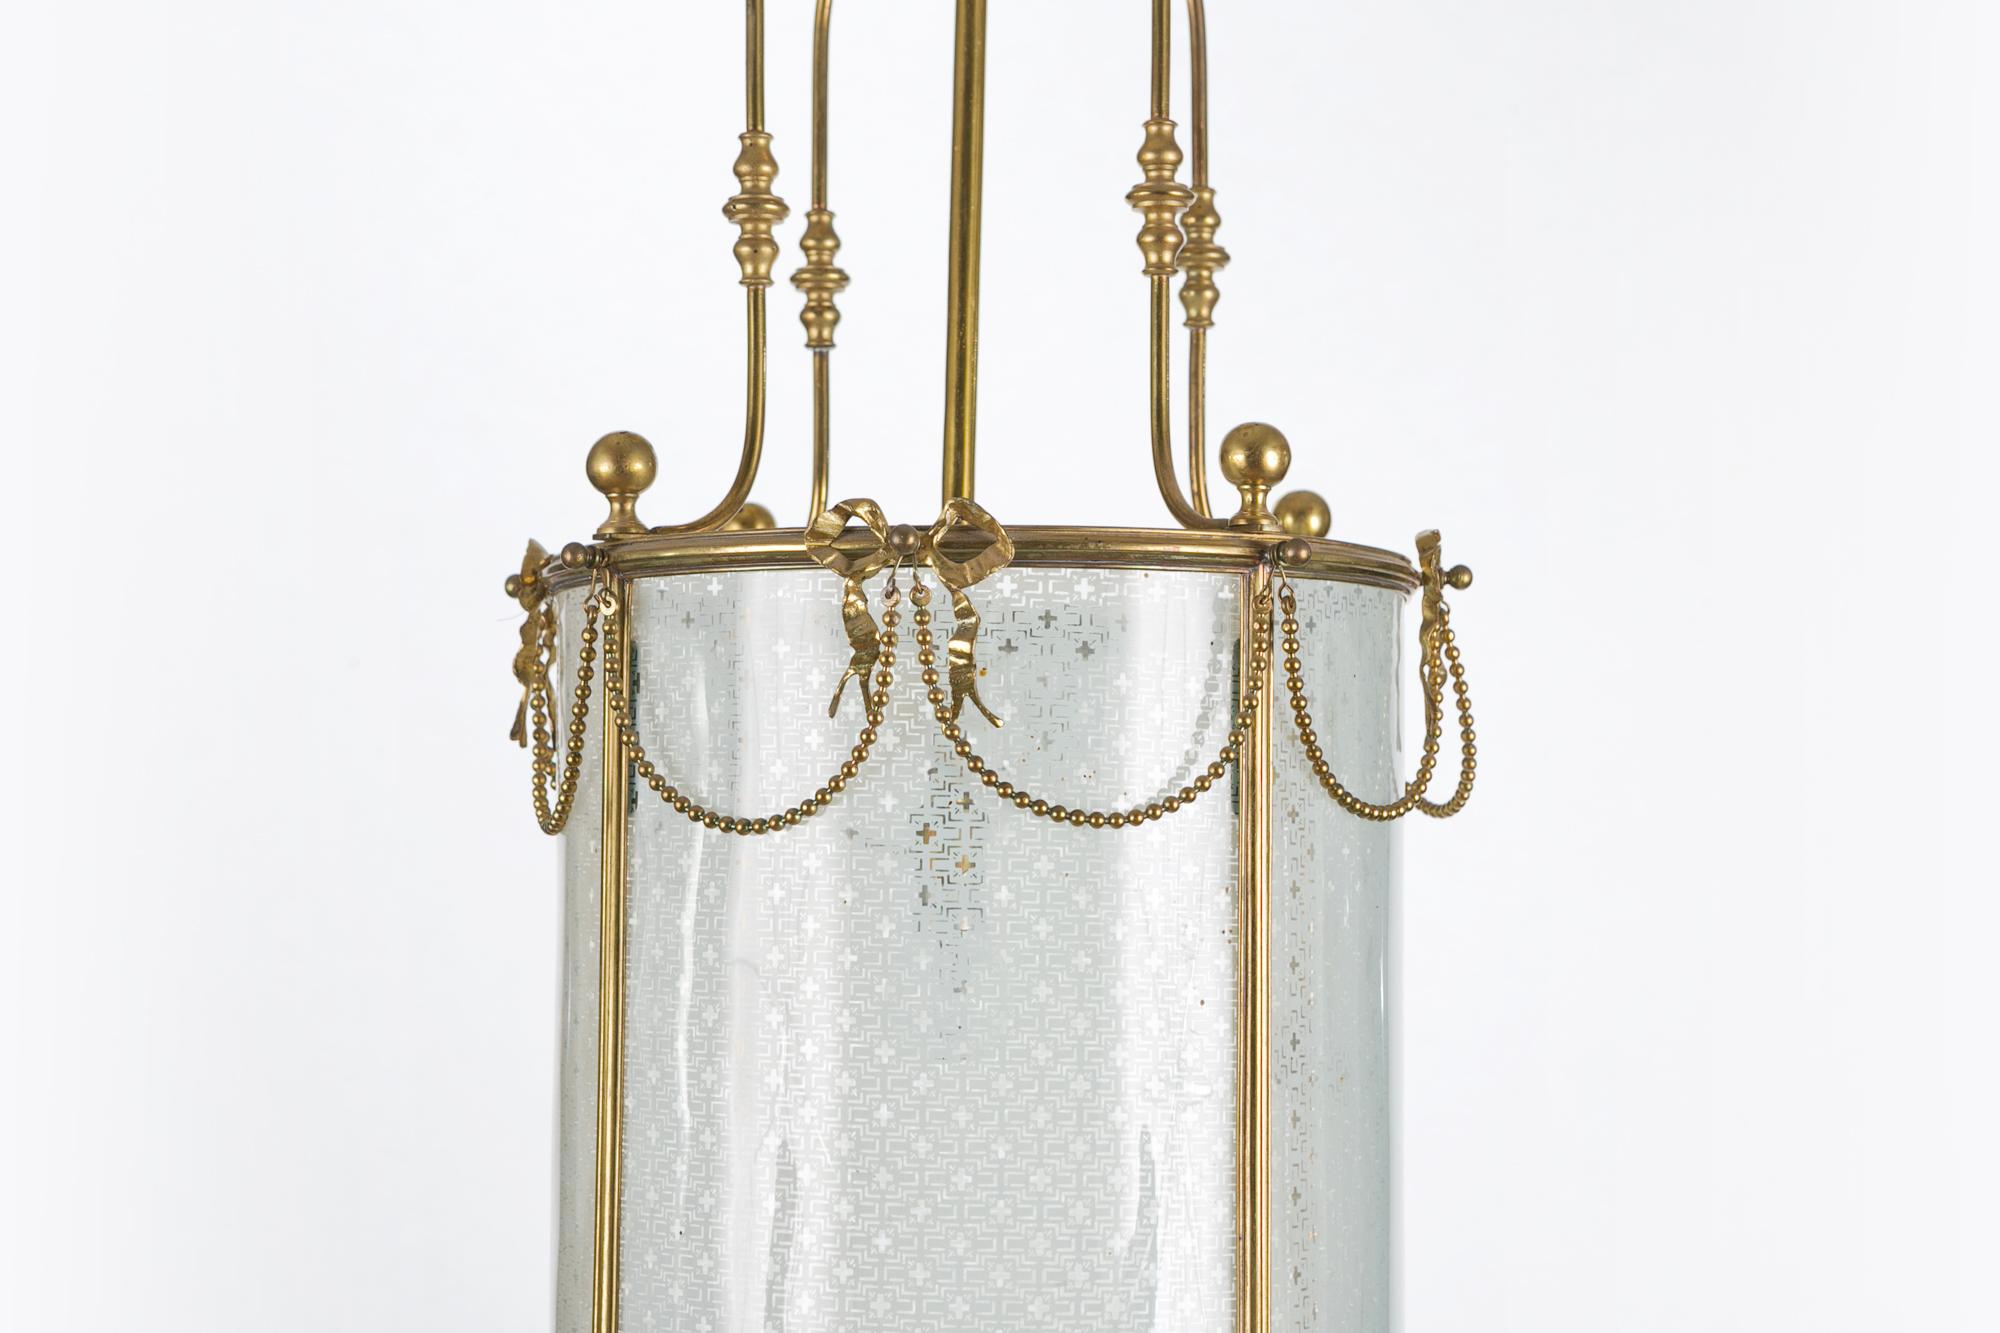 19th century brass lantern of cylindrical form with decorative frieze of beaded swags, supported by ribbon bows and four glass panels.